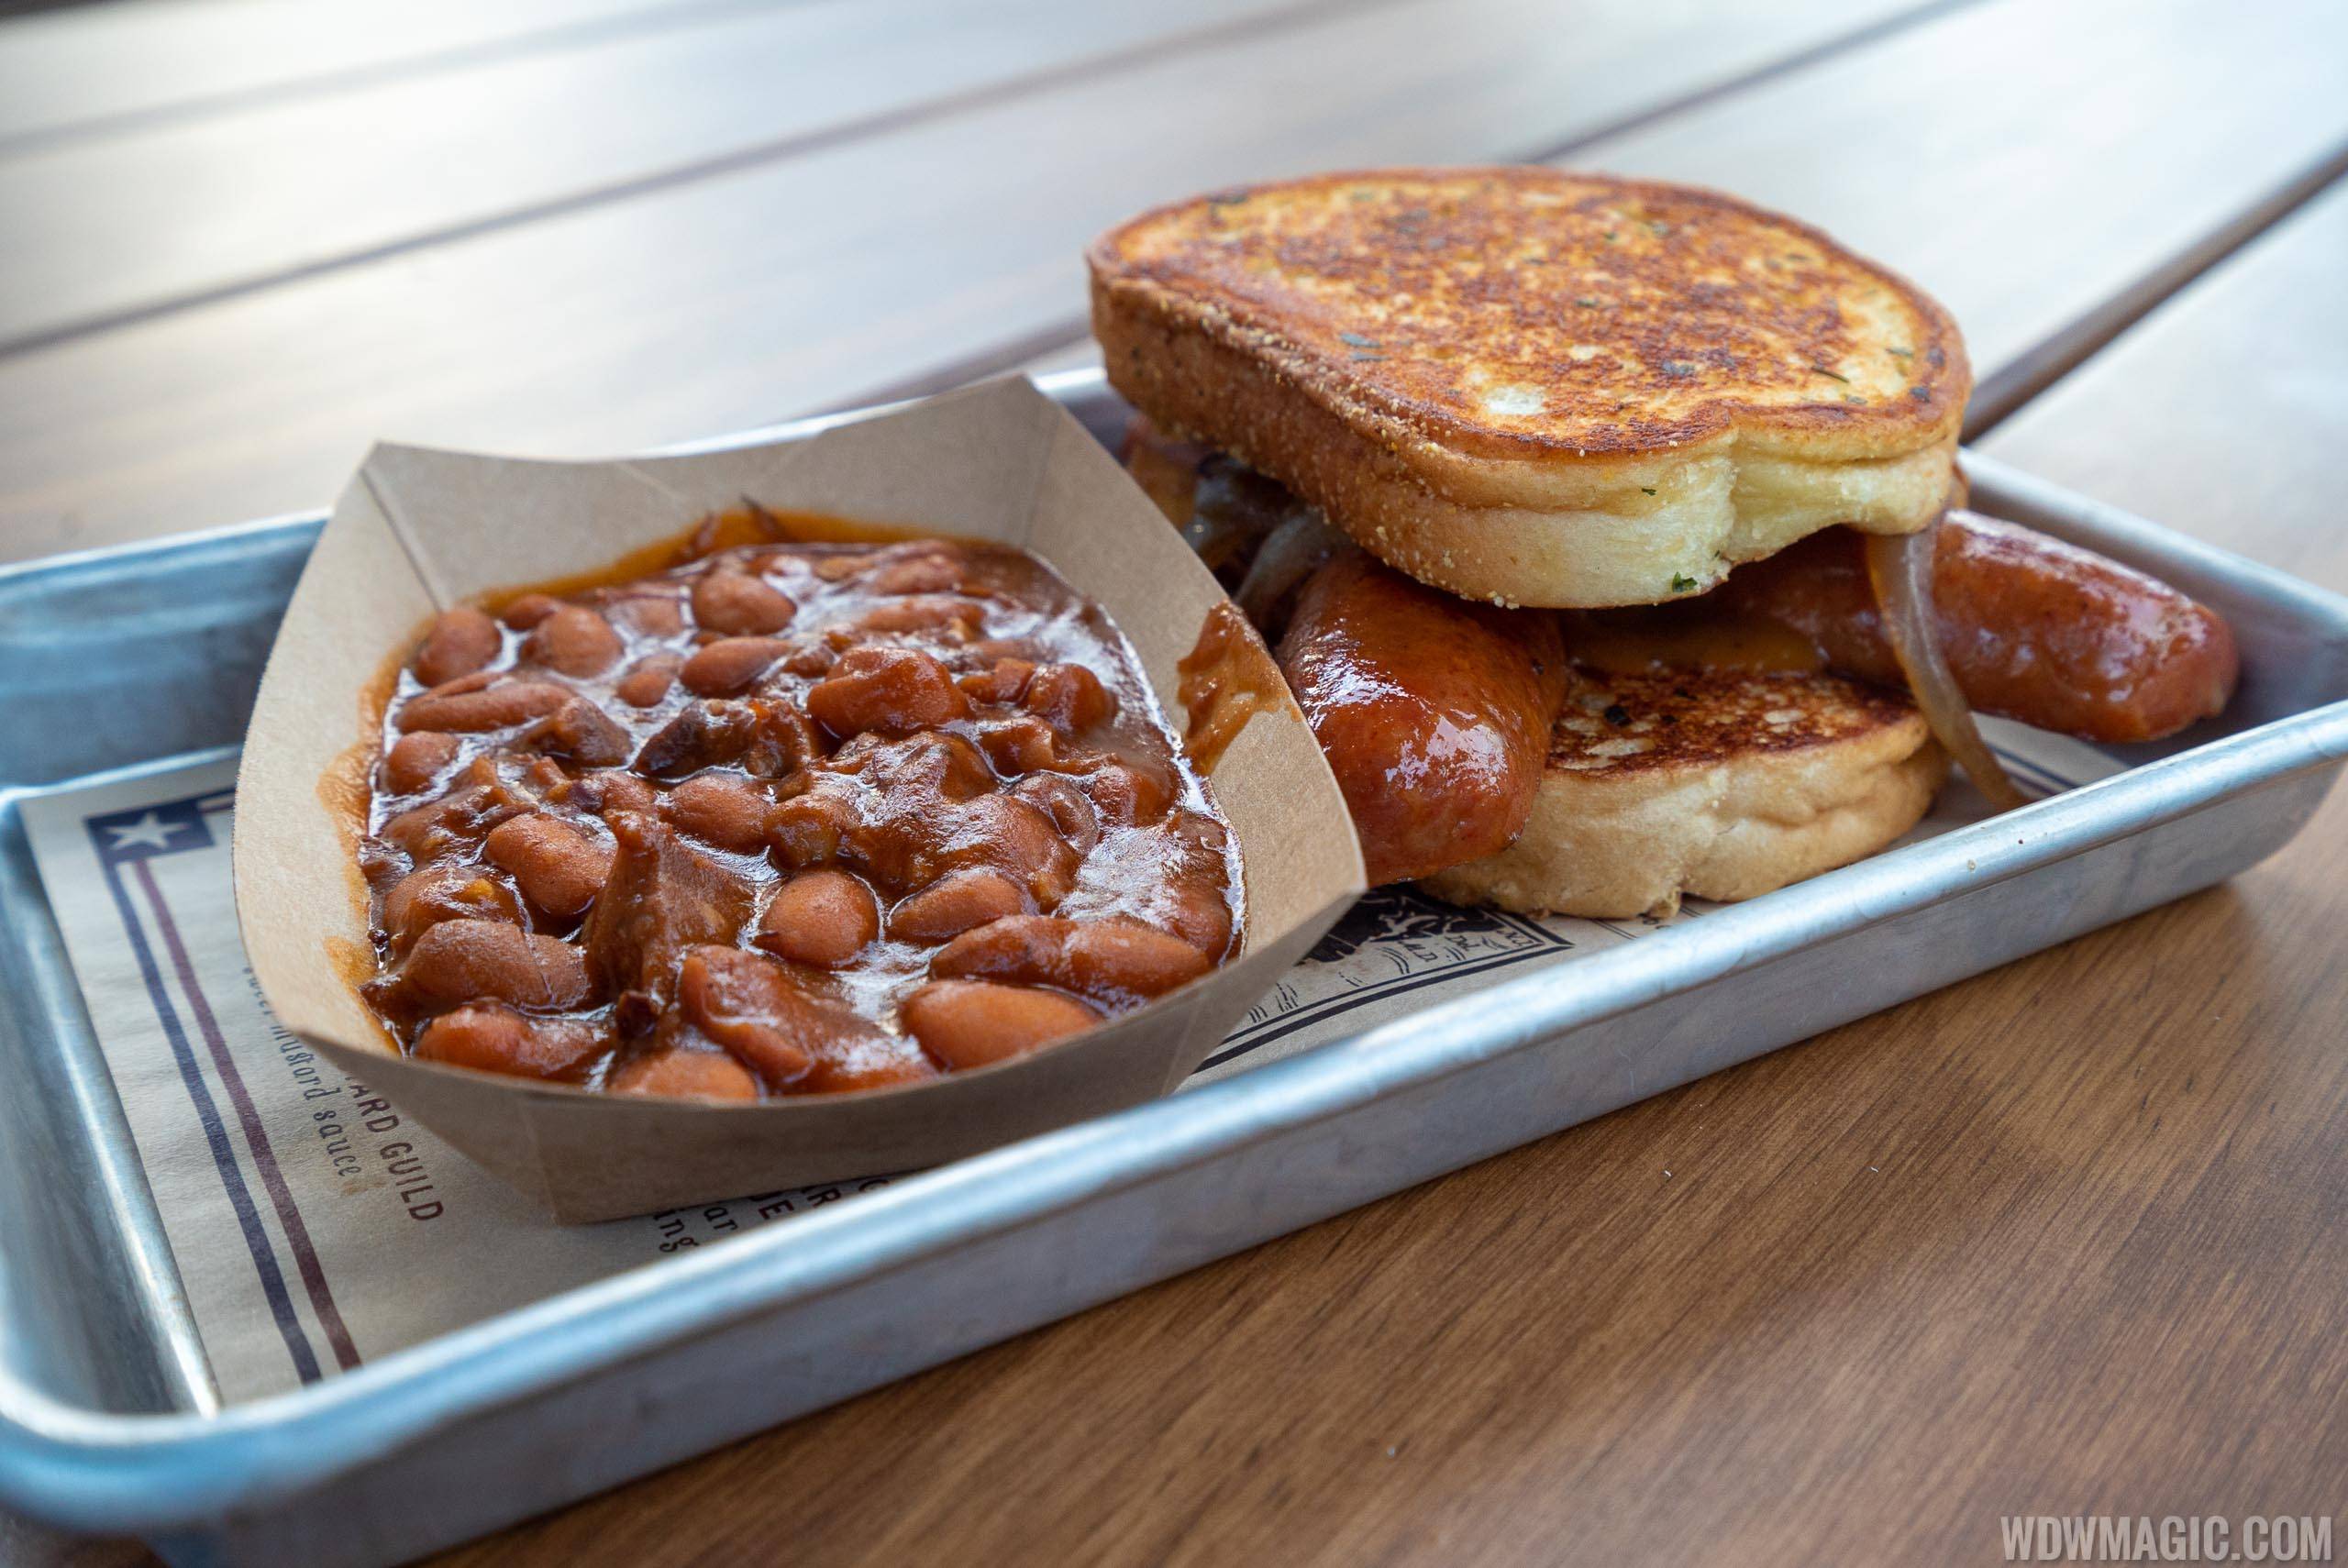 Regal Eagle Smokehouse - South Carolina Smoked Sausage Sandwich with Baked Beans with Burnt Ends